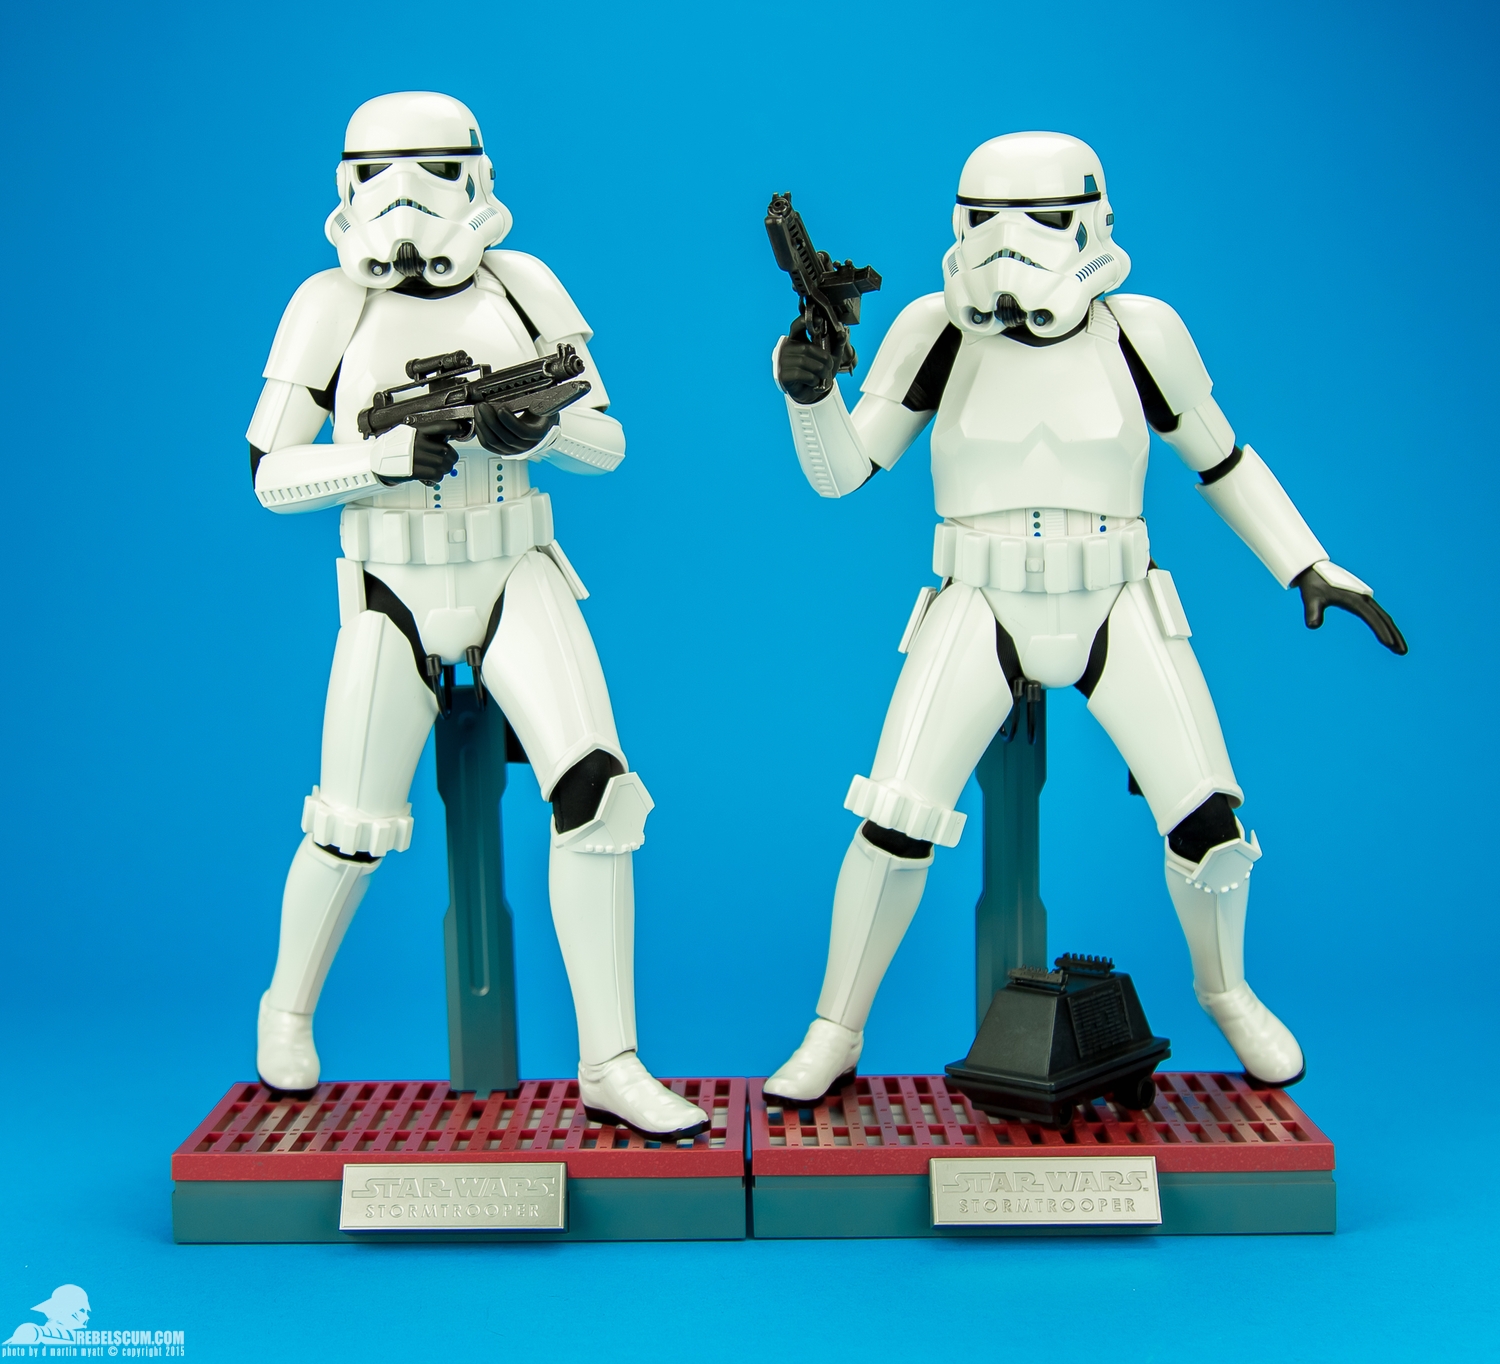 MMS268-Stormtroopers-Hot-Toys-Star-Wars-Two-Pack-032.jpg